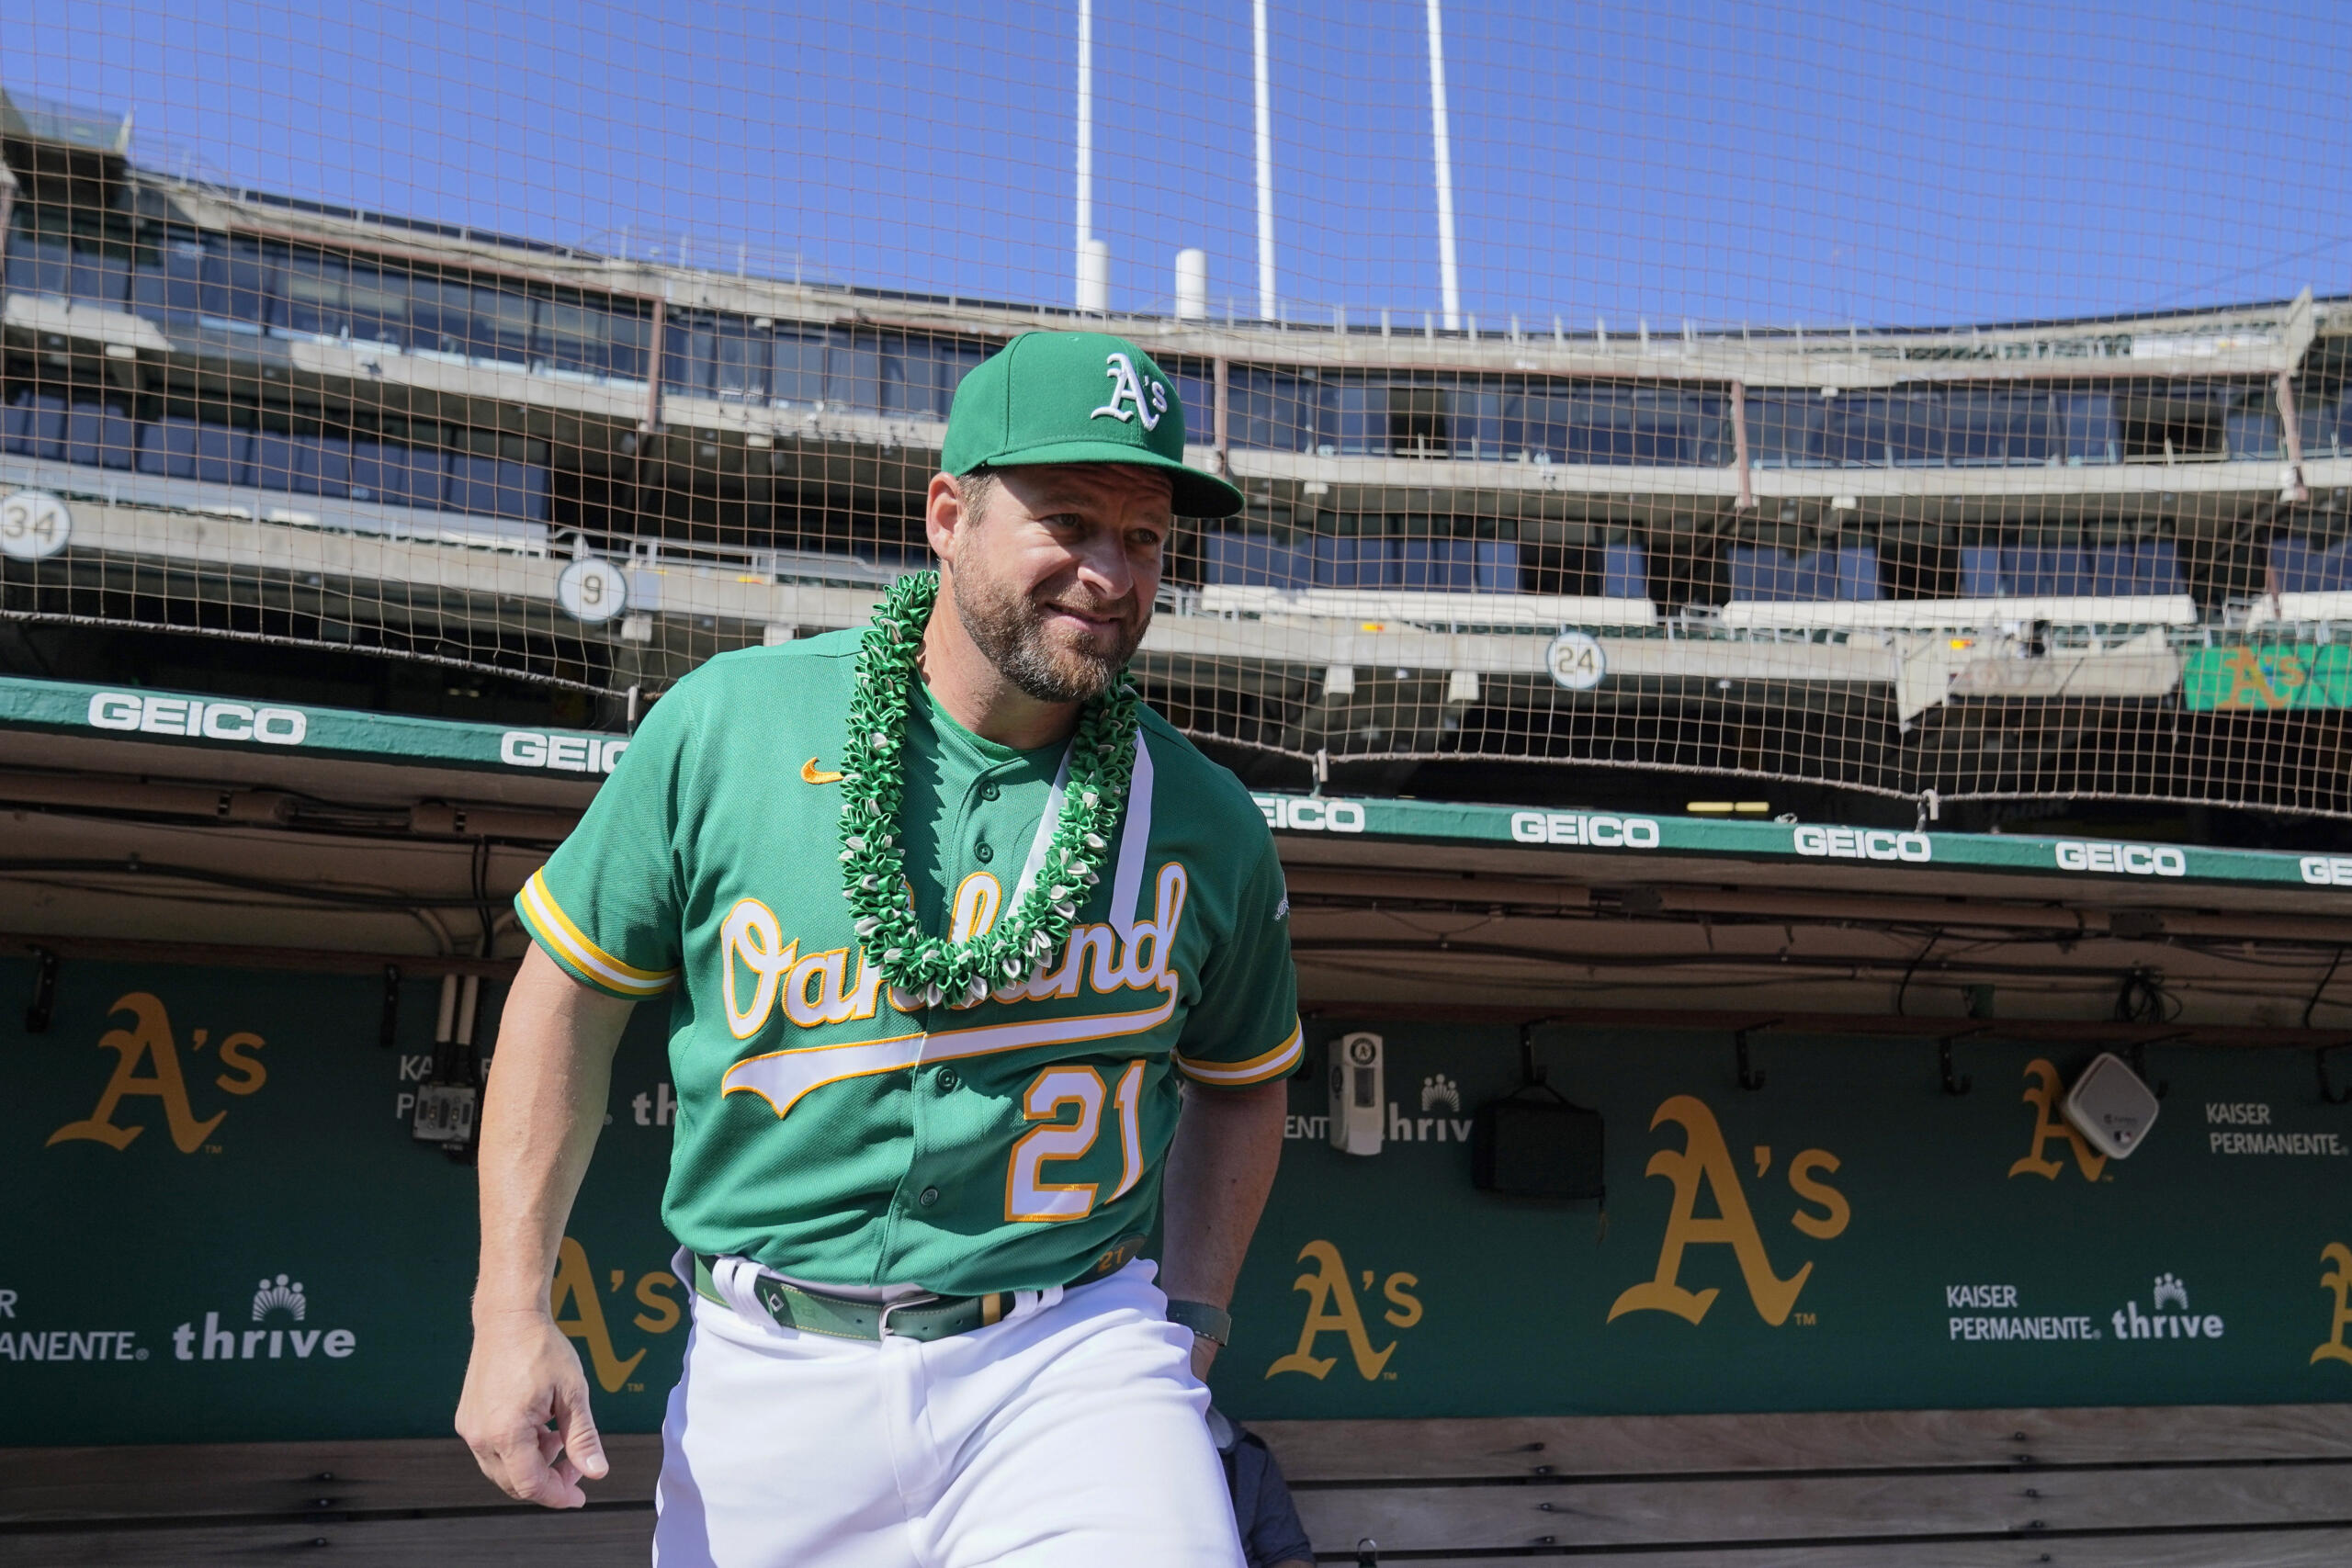 Retired catcher Stephen Vogt is joining the Seattle Mariners as a bullpen and quality control coach, fulfilling his goal to go right into coaching. The 38-year-old Vogt called it a career after his 10th major league season in 2022. (AP Photo/Godofredo A.